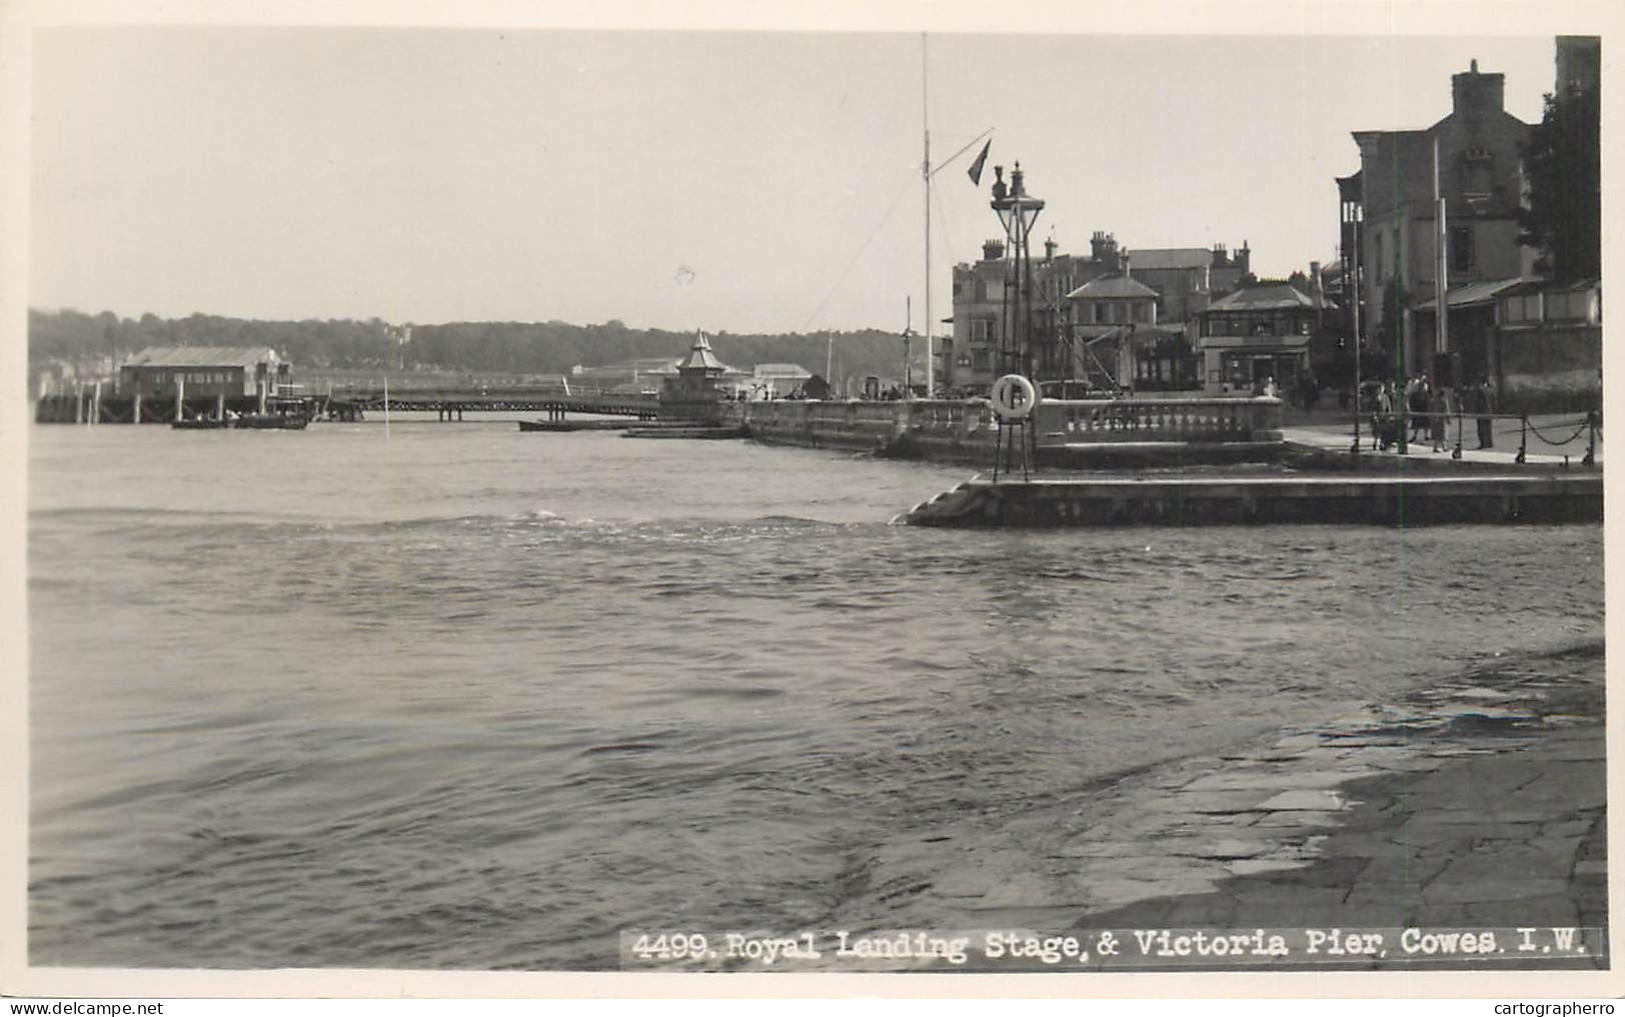 Royal Landing Stage & Victoria Pier Cowes - Cowes